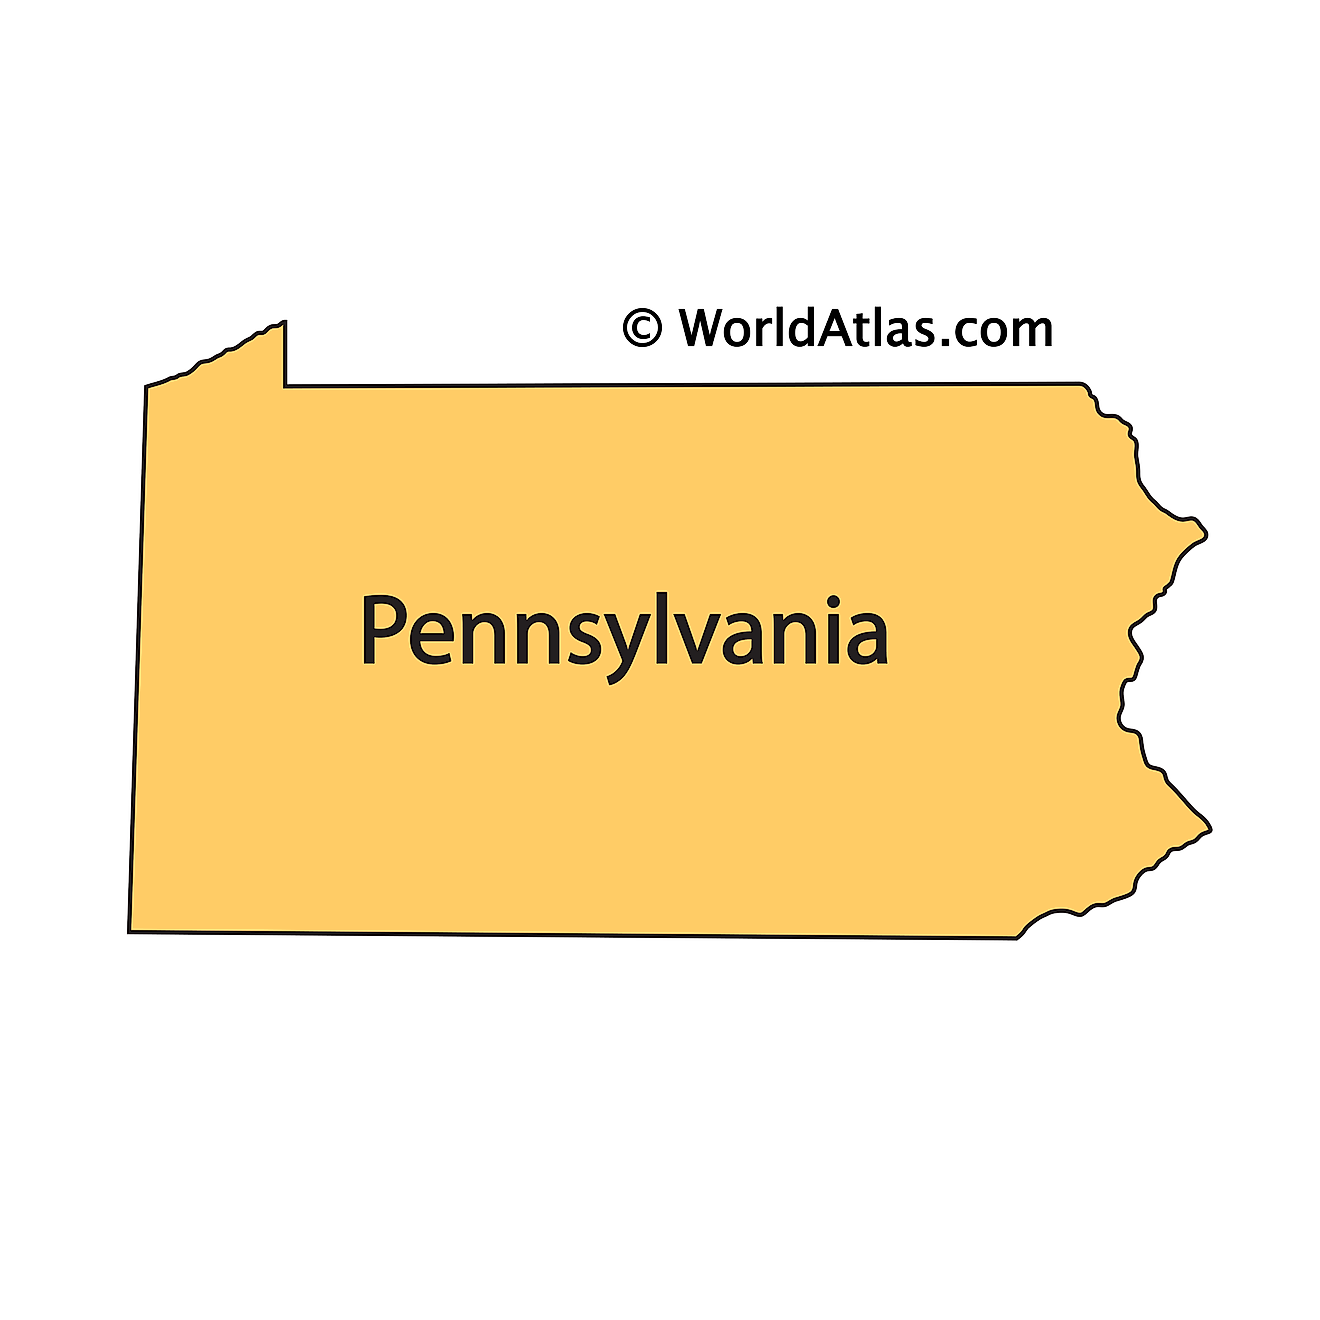 Outline Map of Pennsylvania